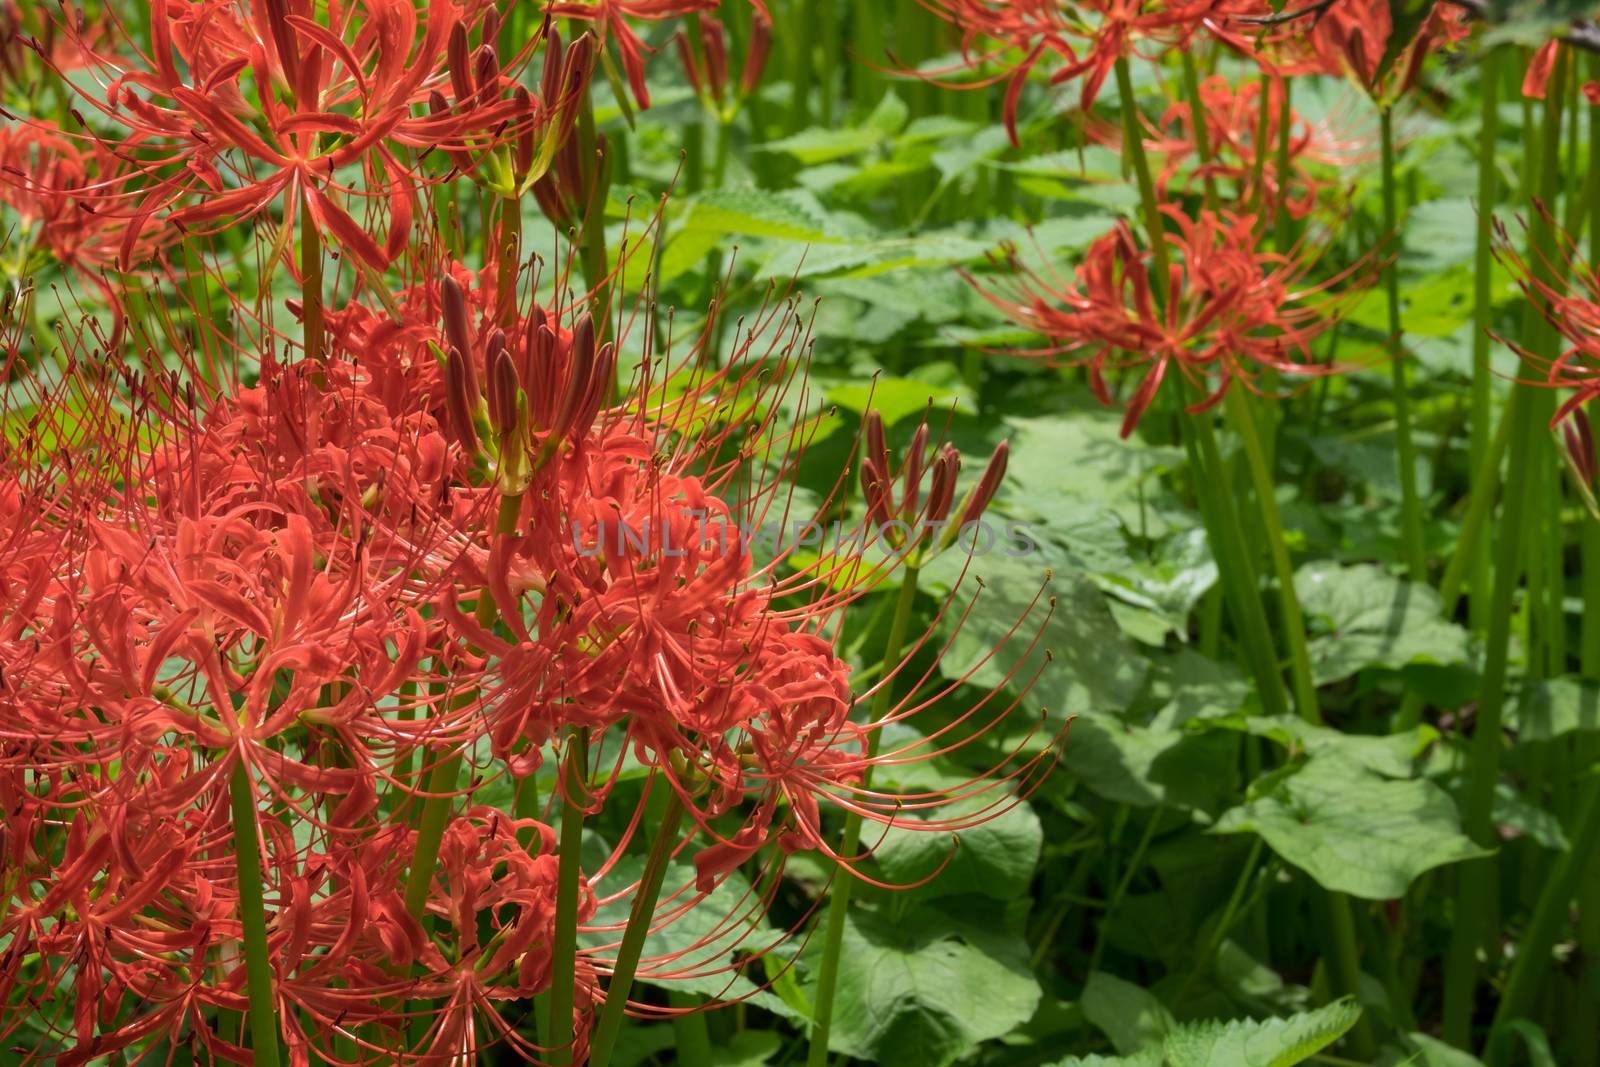 RED SPIDER LILY by jaruncha